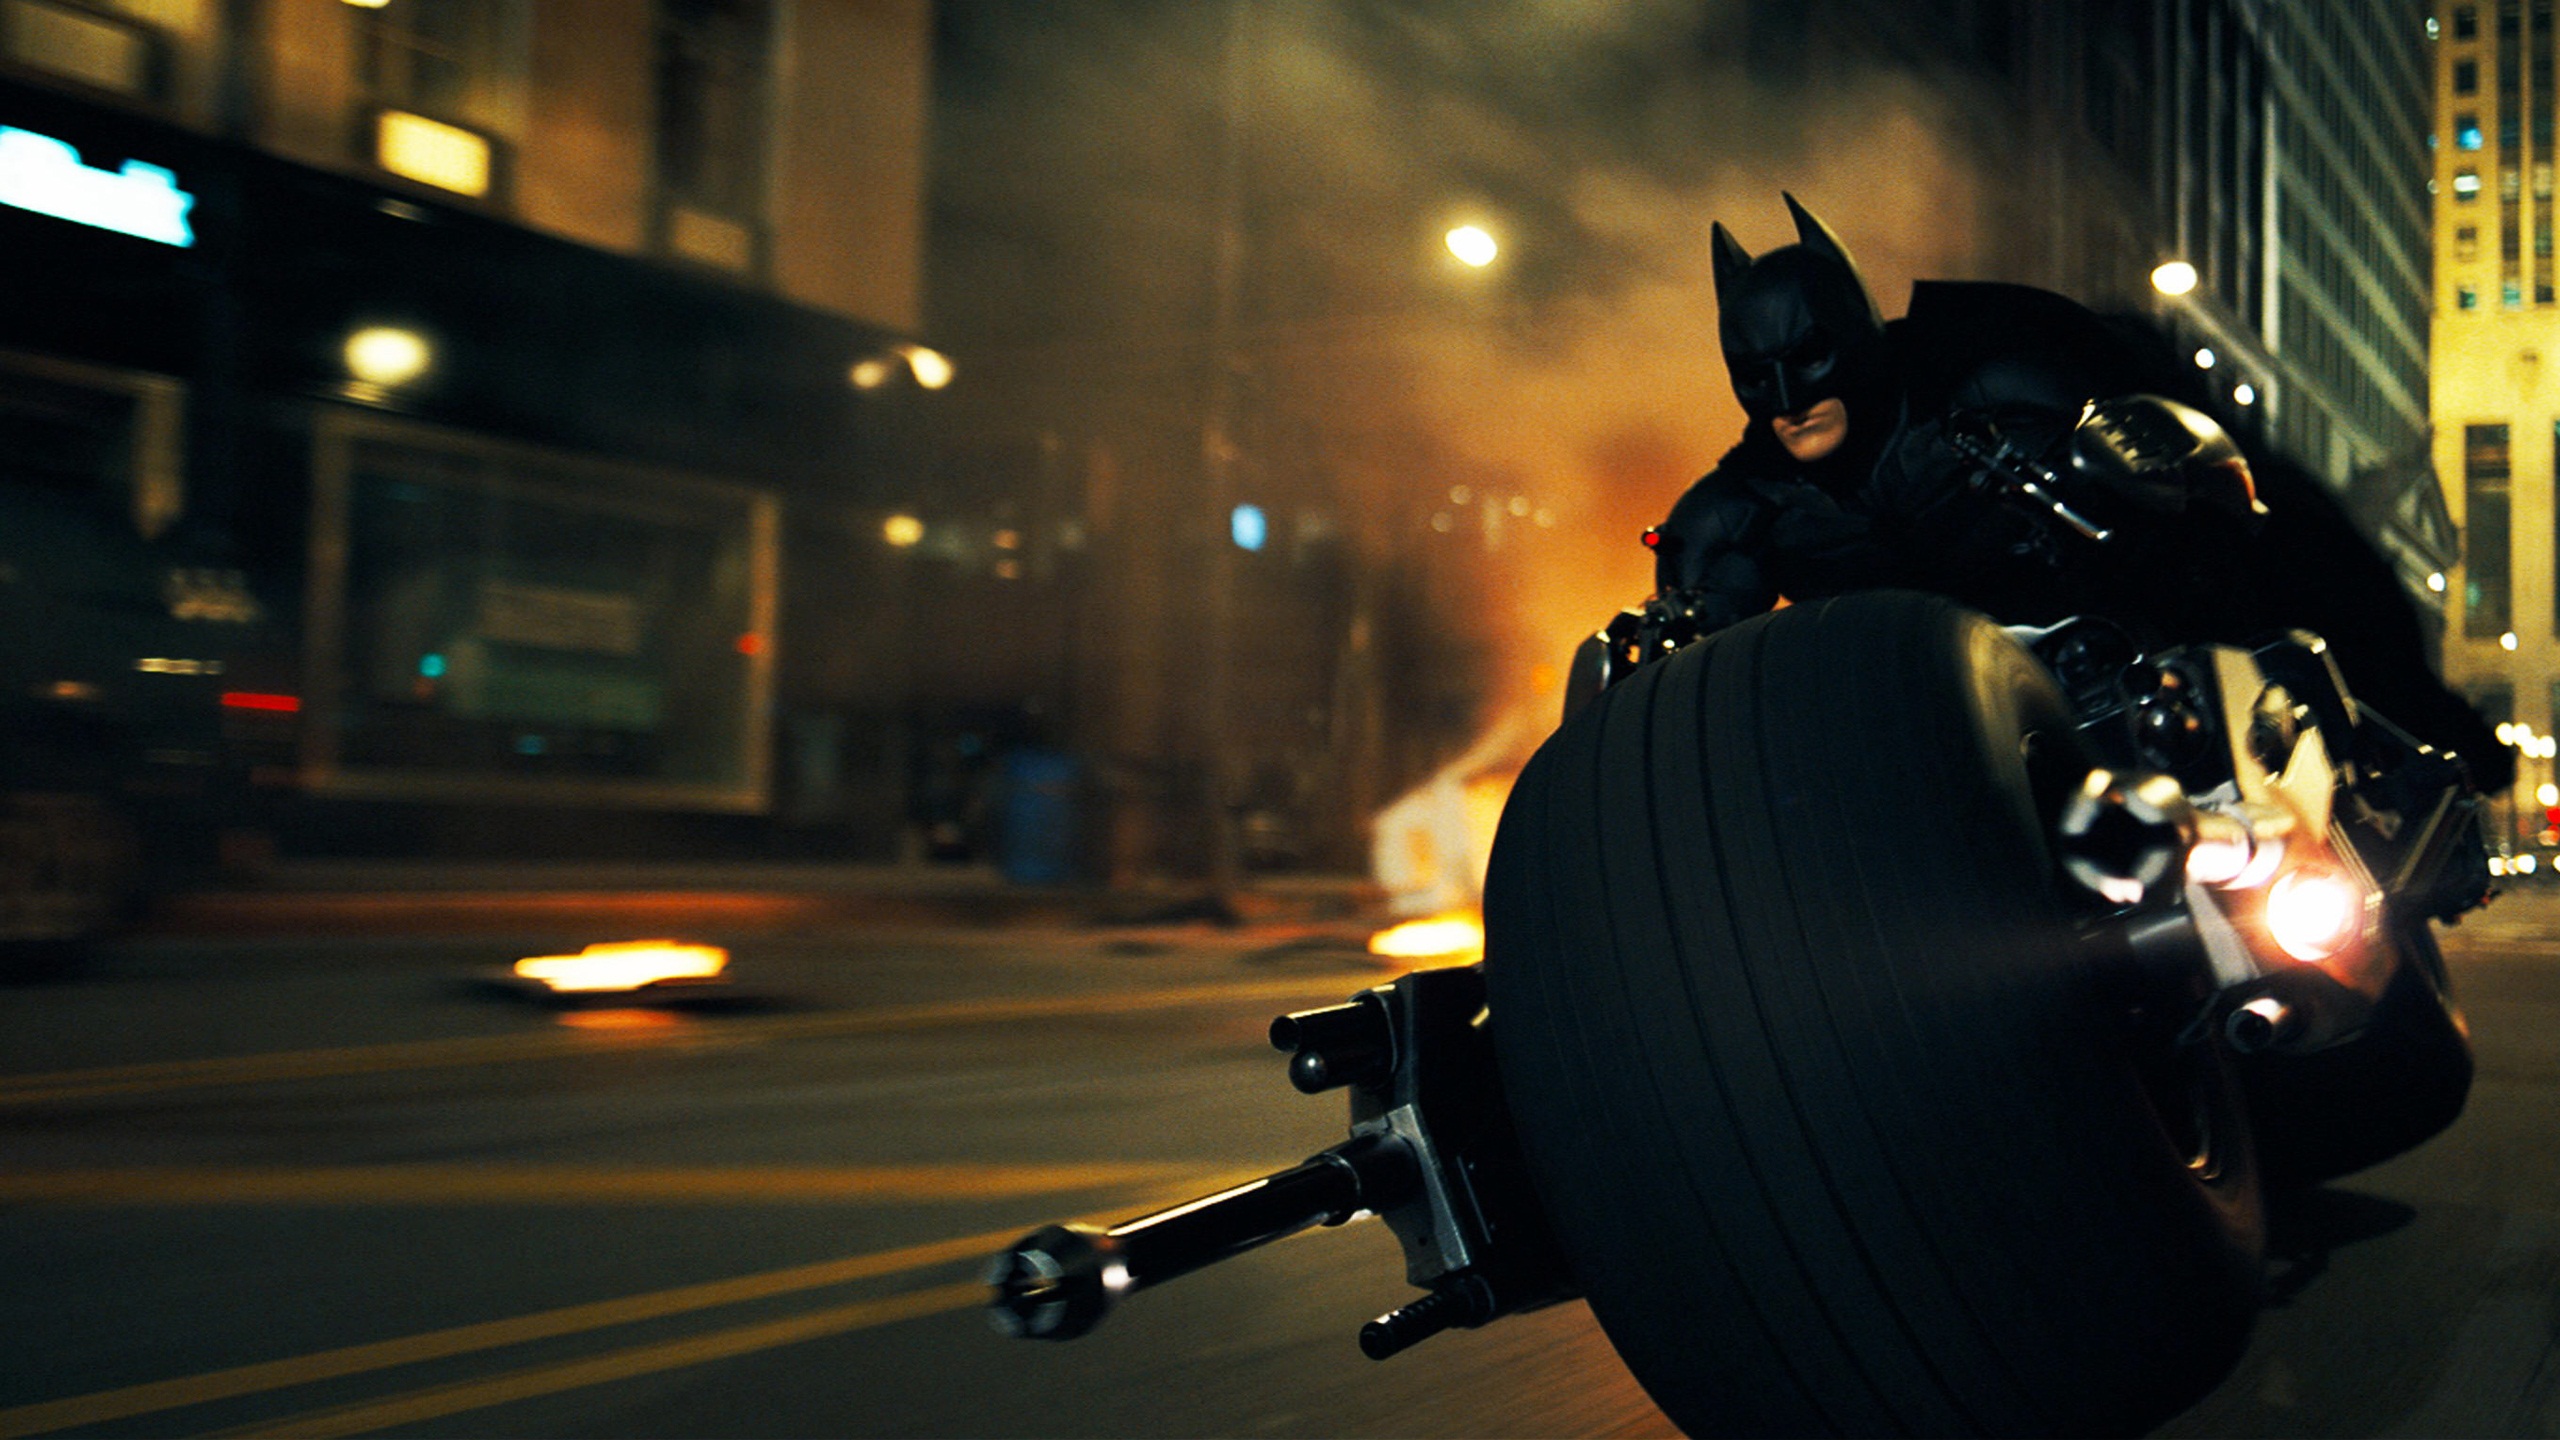 Free download Dark Knight Rises HD Wallpapers and Desktop Backgrounds